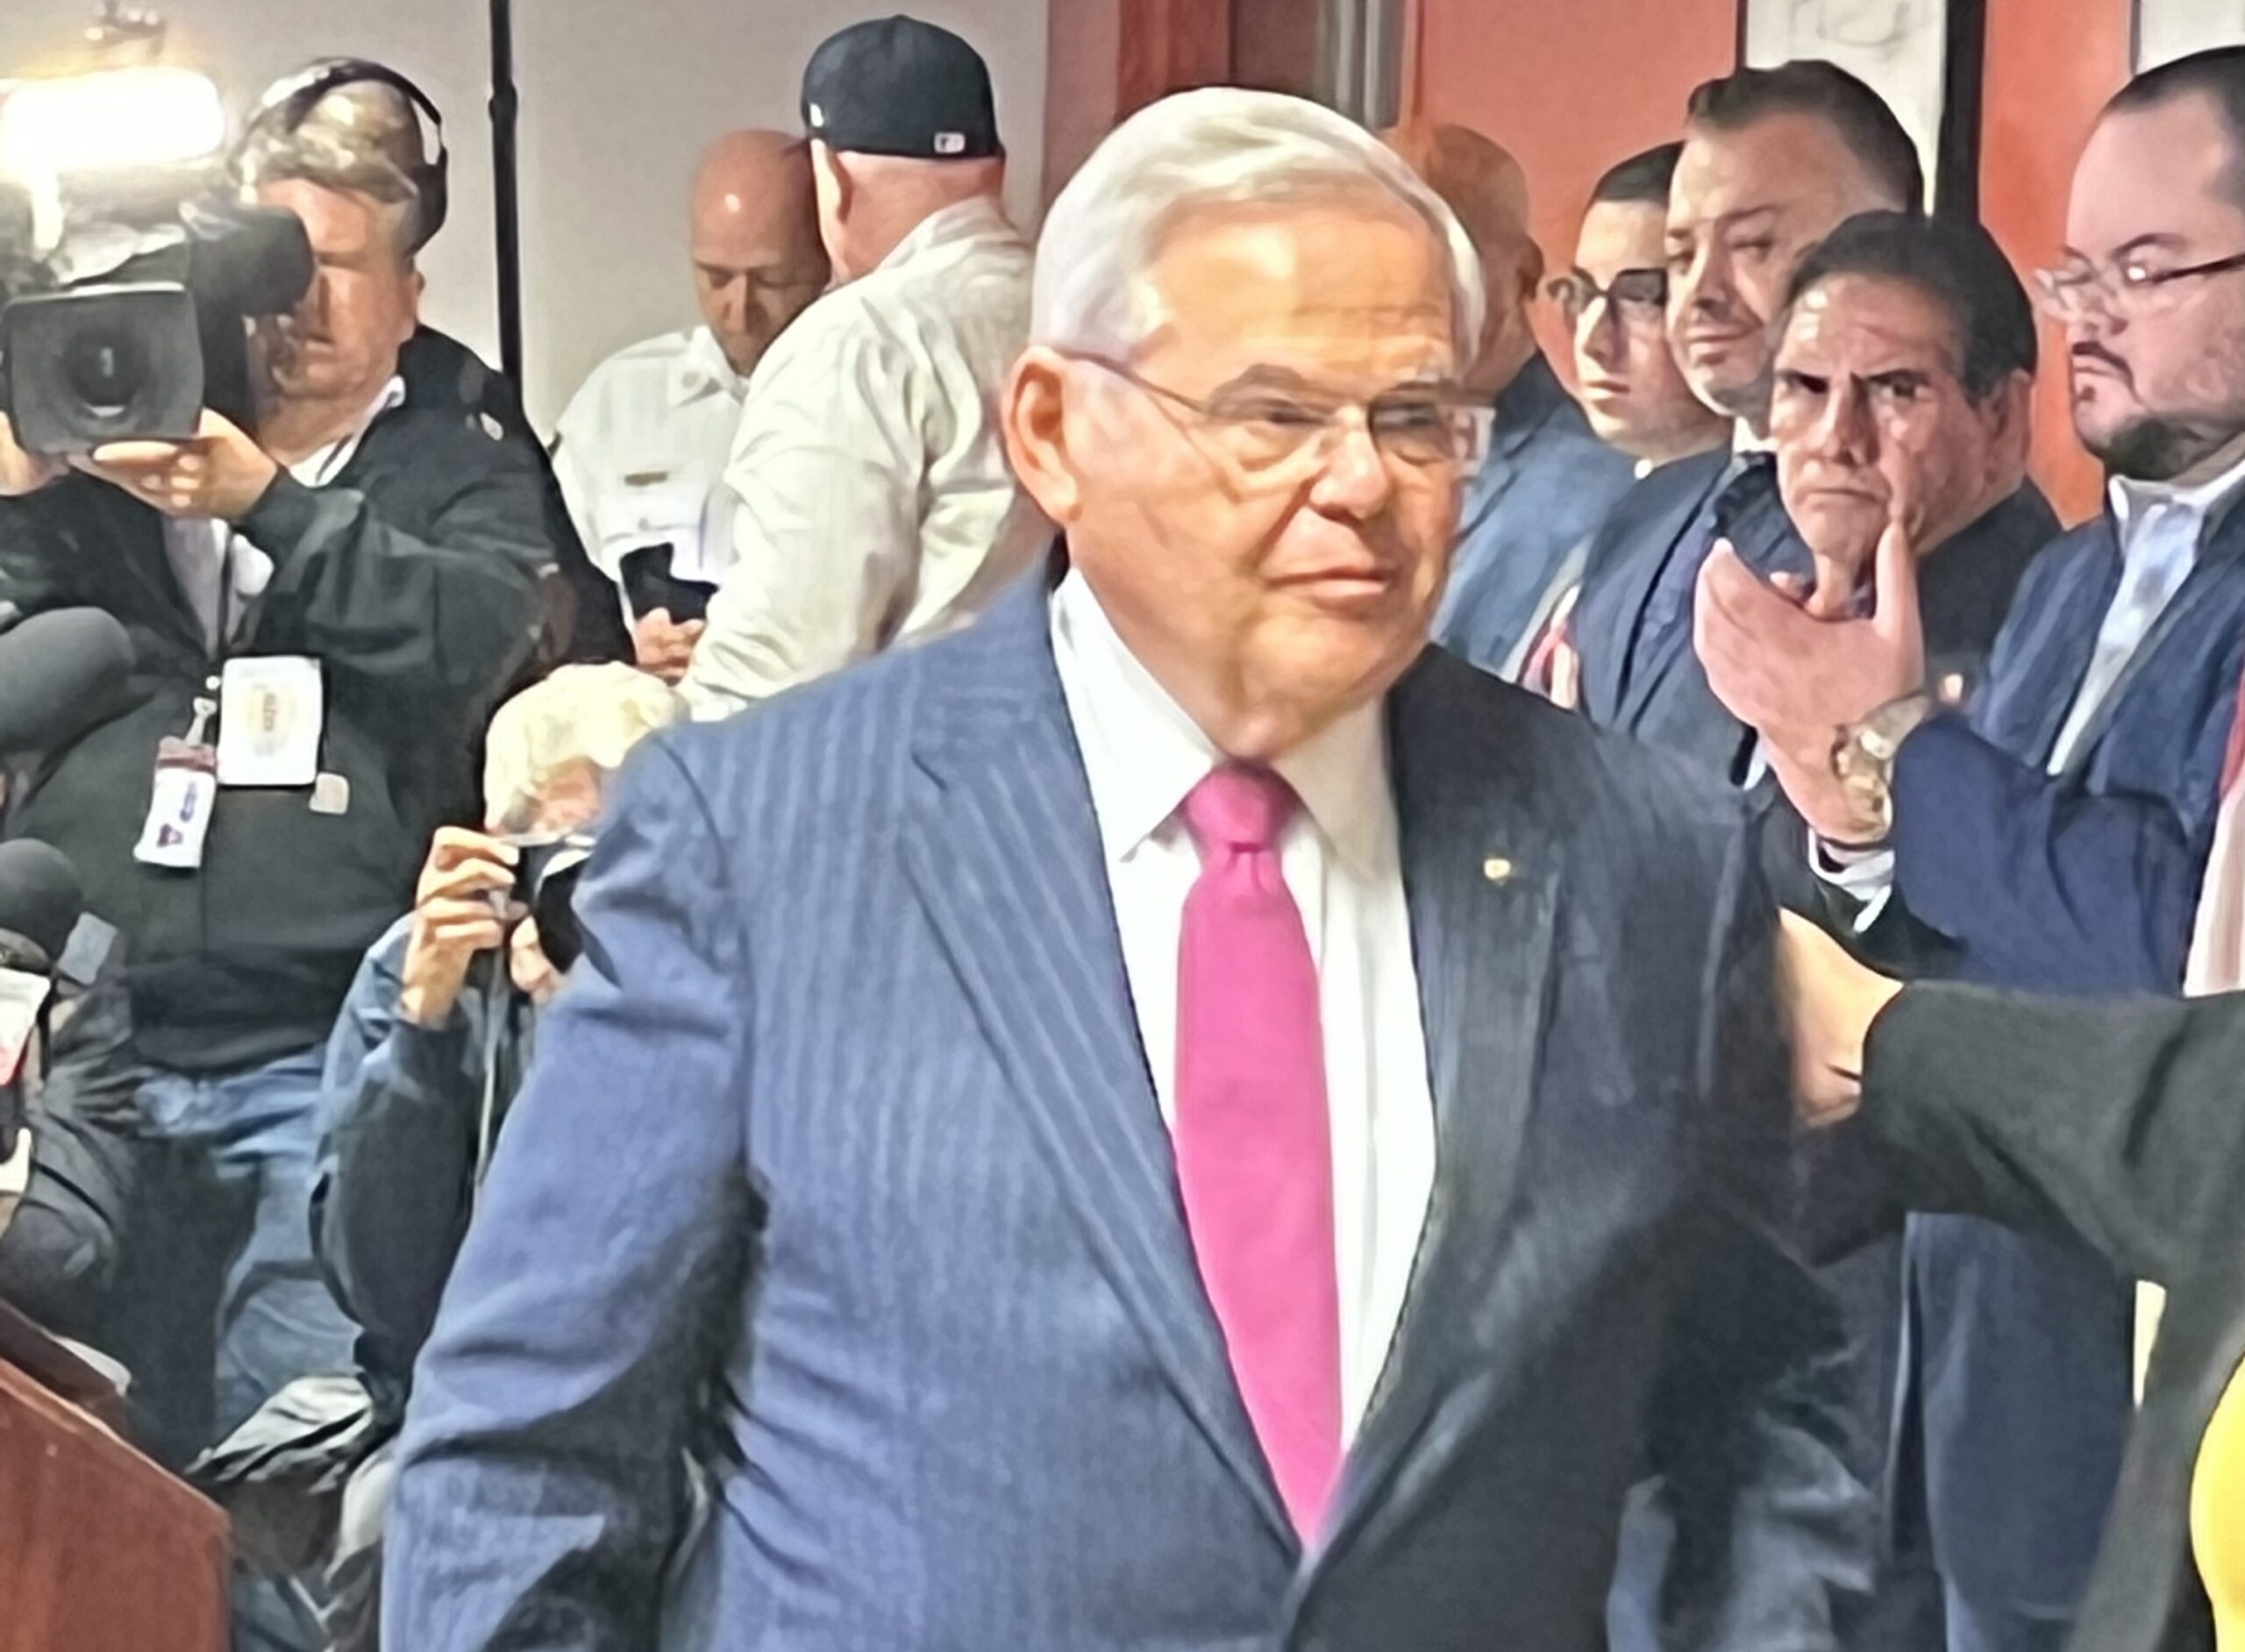 Potential Replacement for Bob Menendez: Jay Lassiter in the Event of Expulsion or Resignation